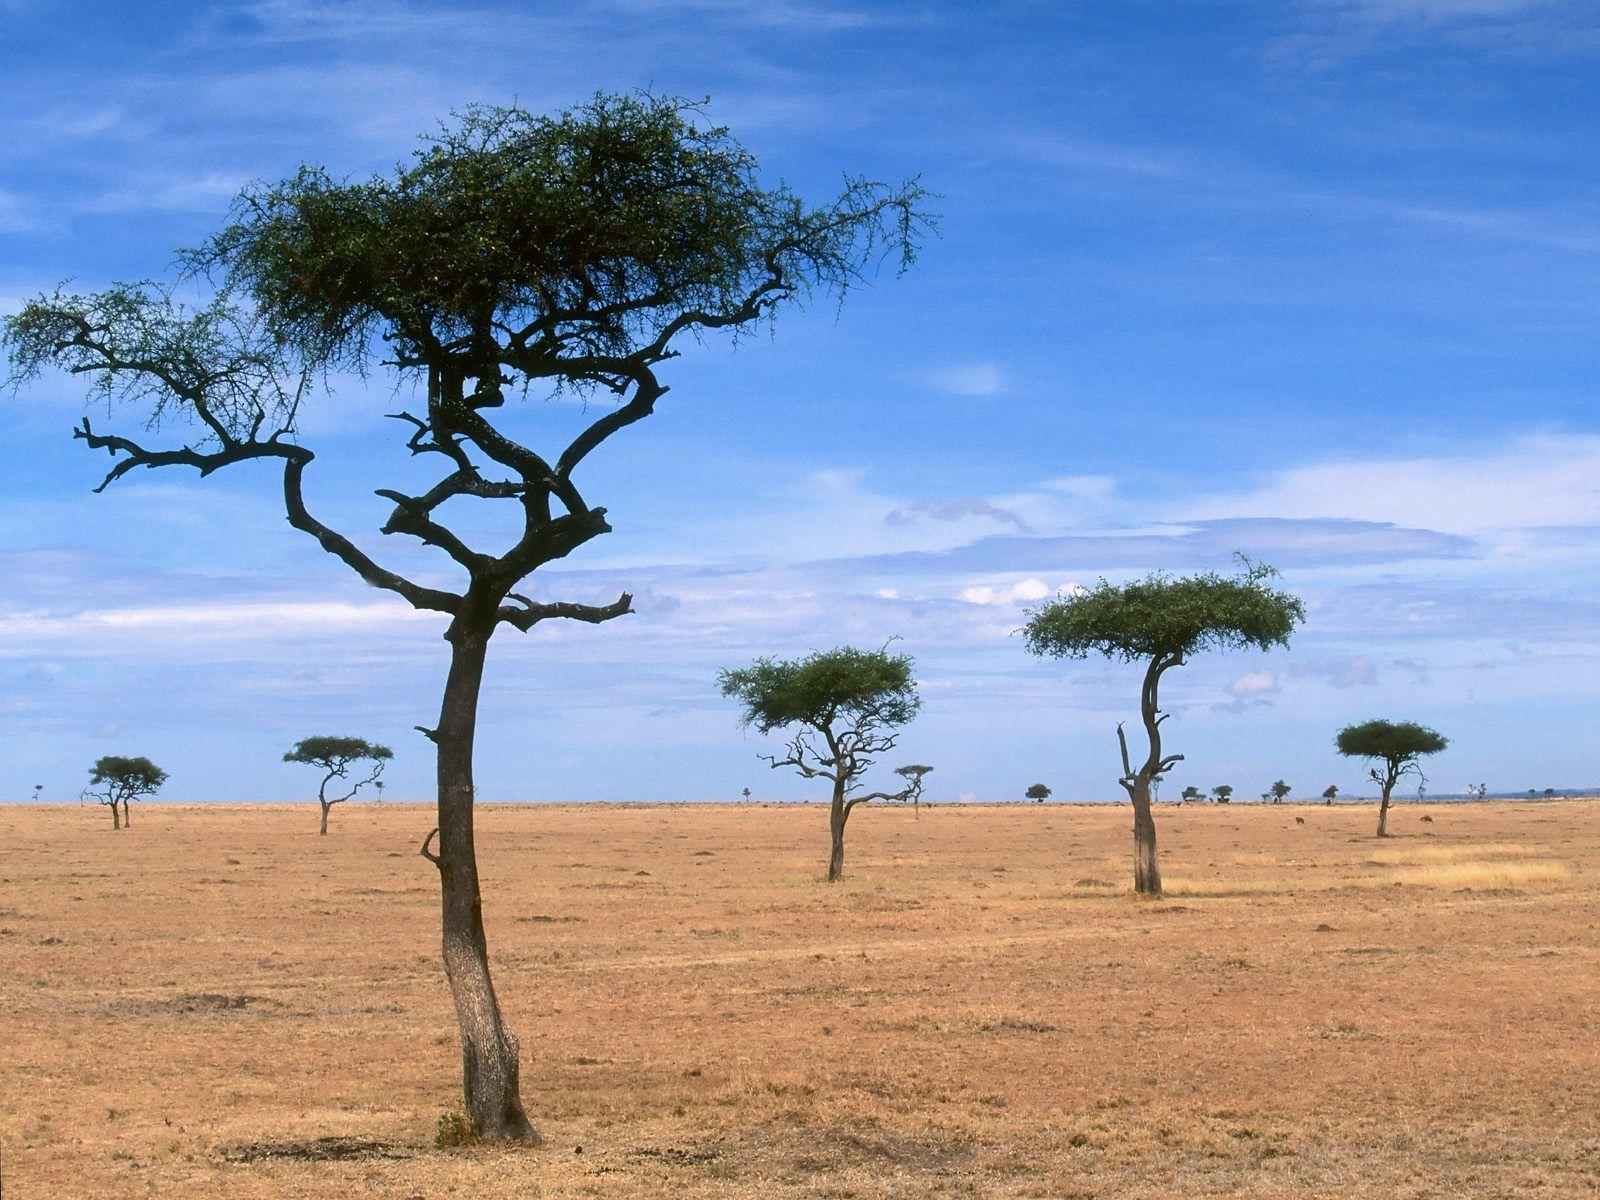 Scattered Acacia Trees / Kenya / Africa wallpaper and image